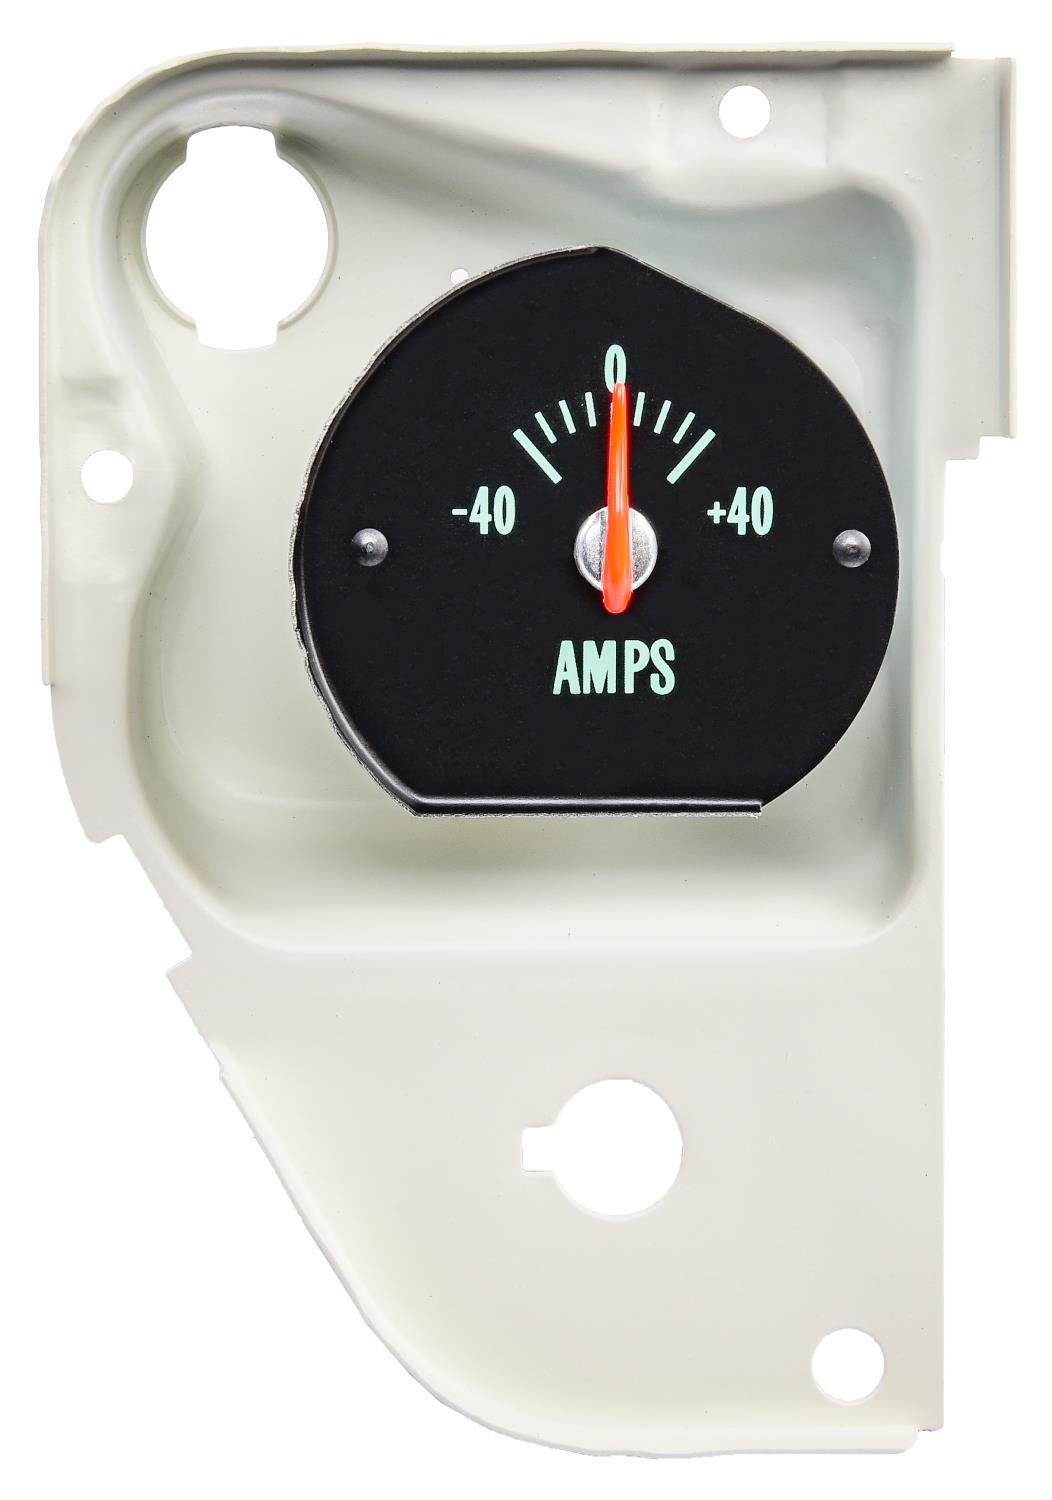 Factory Style Amp Gauge for 1970 Chevrolet Chevelle,